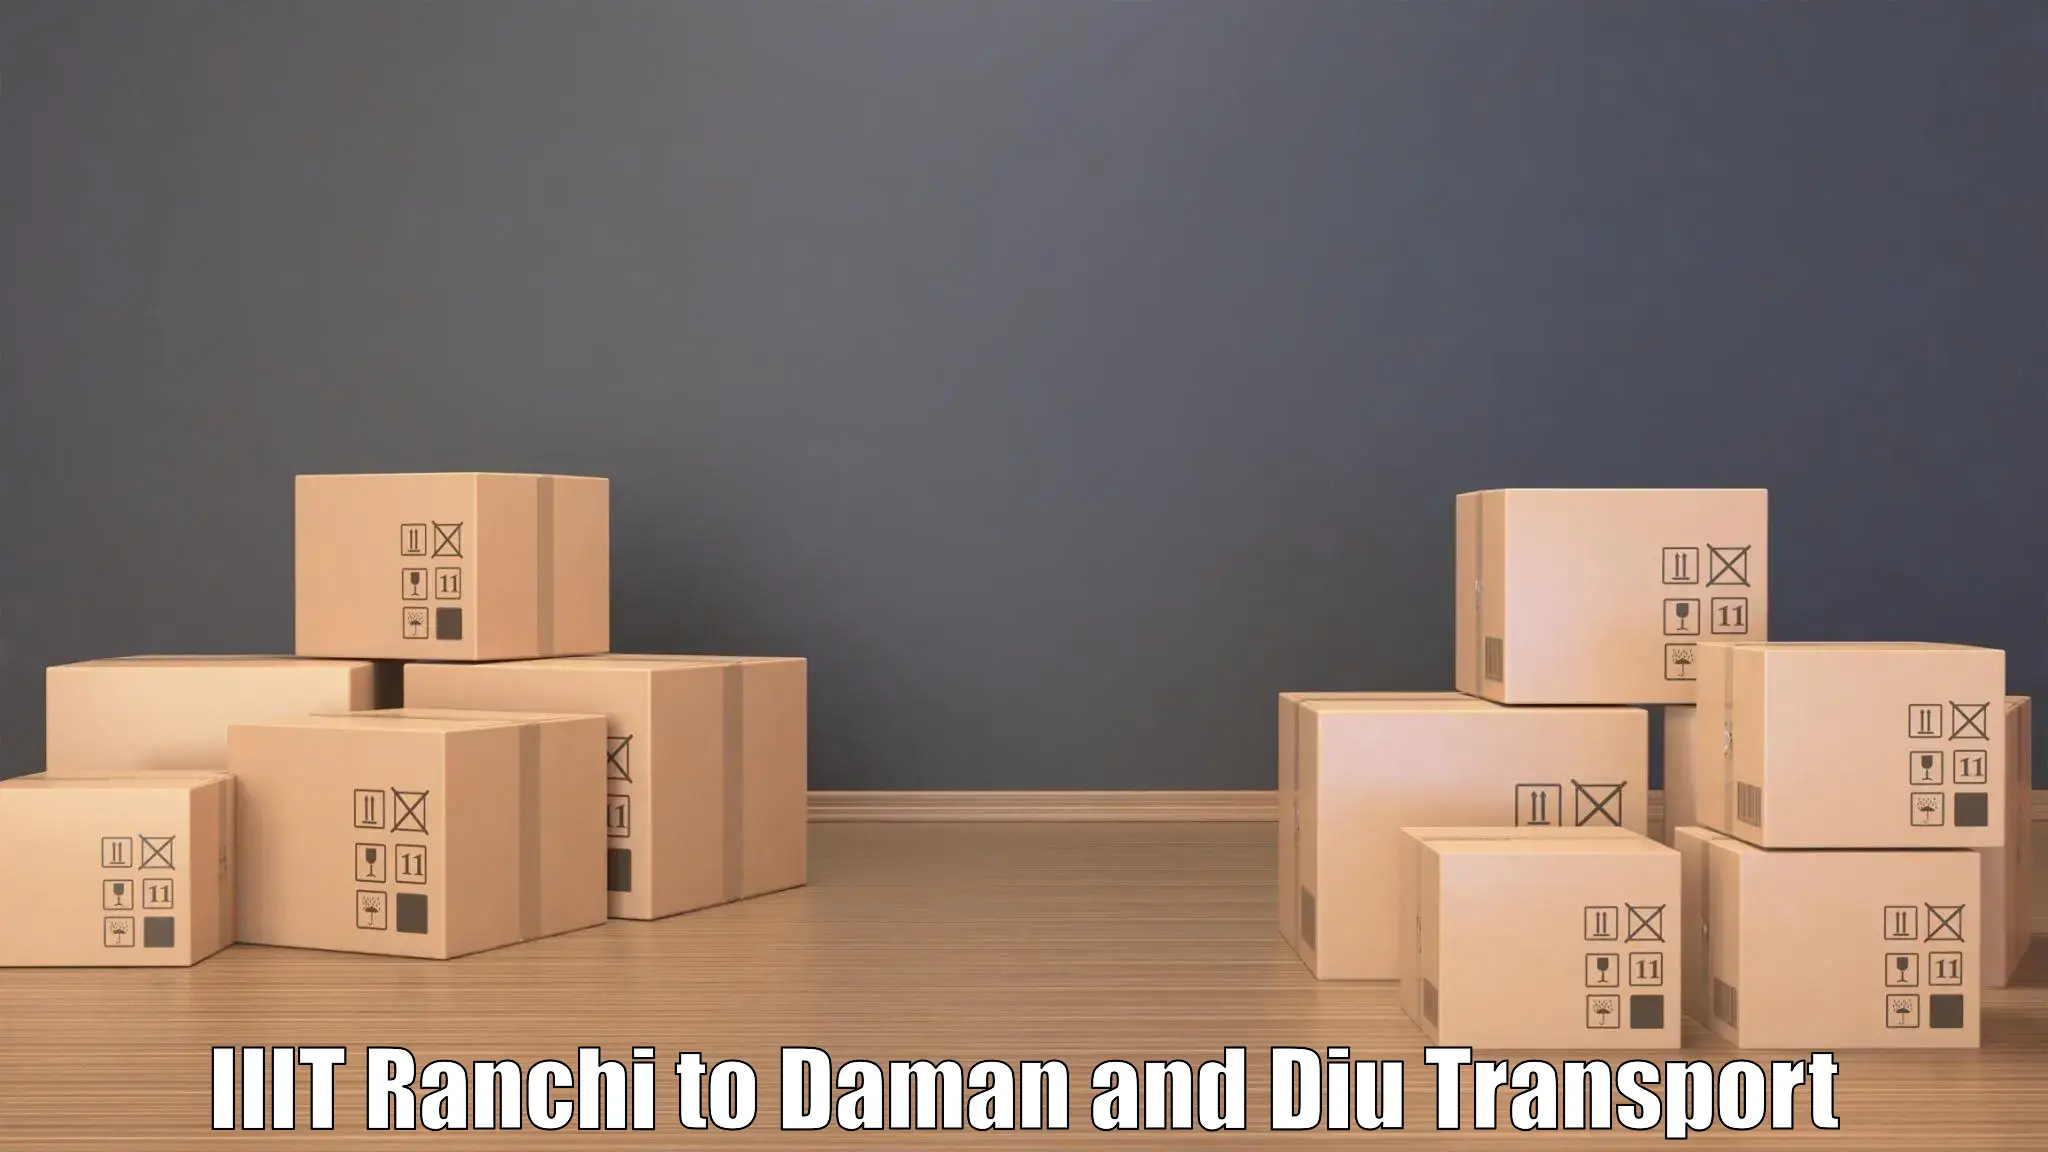 Daily parcel service transport IIIT Ranchi to Daman and Diu